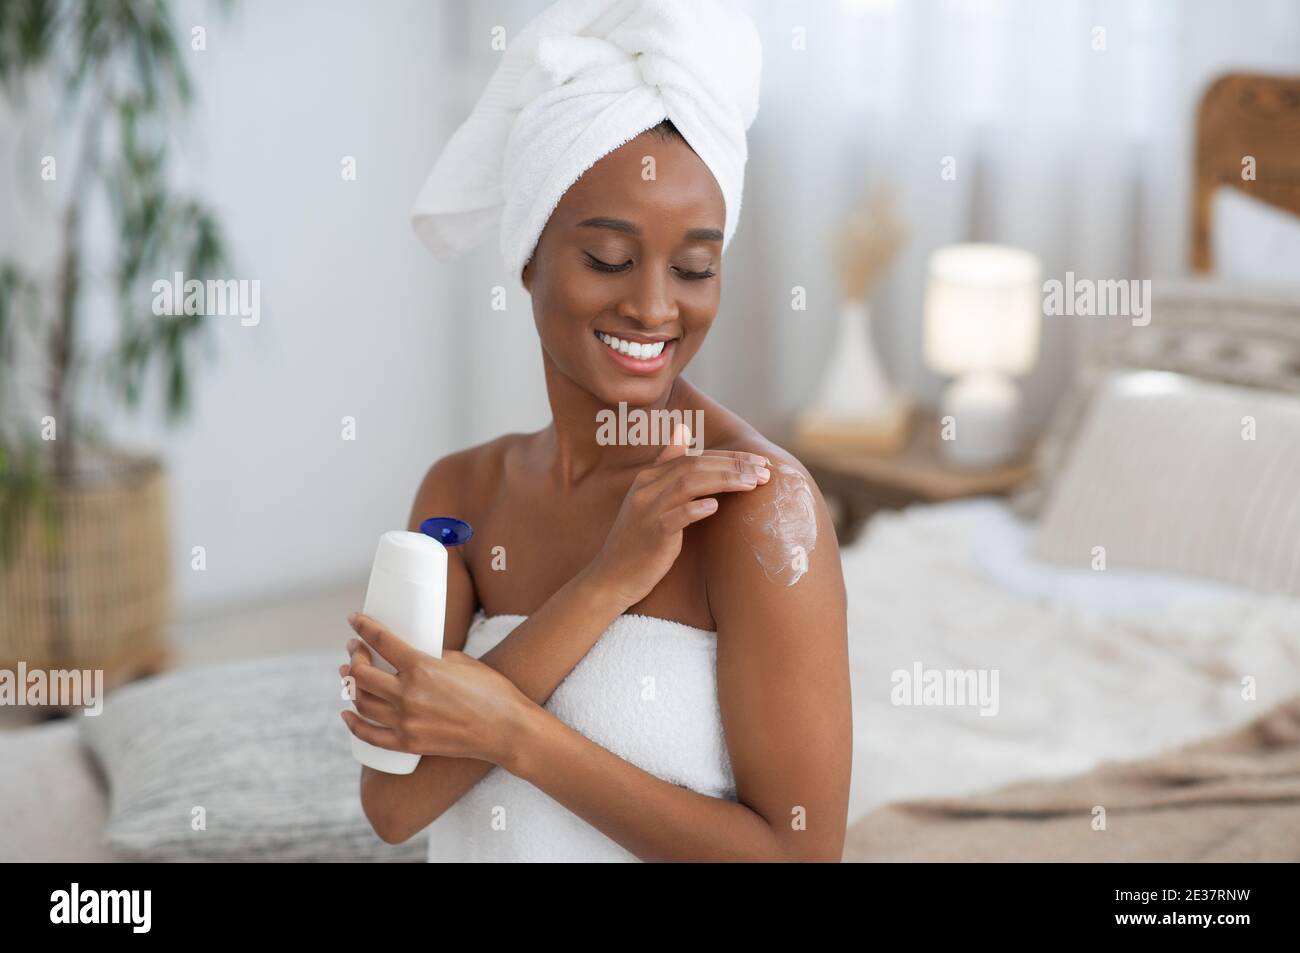 Home care, spa and cosmetics for skin during lockdown Stock Photo